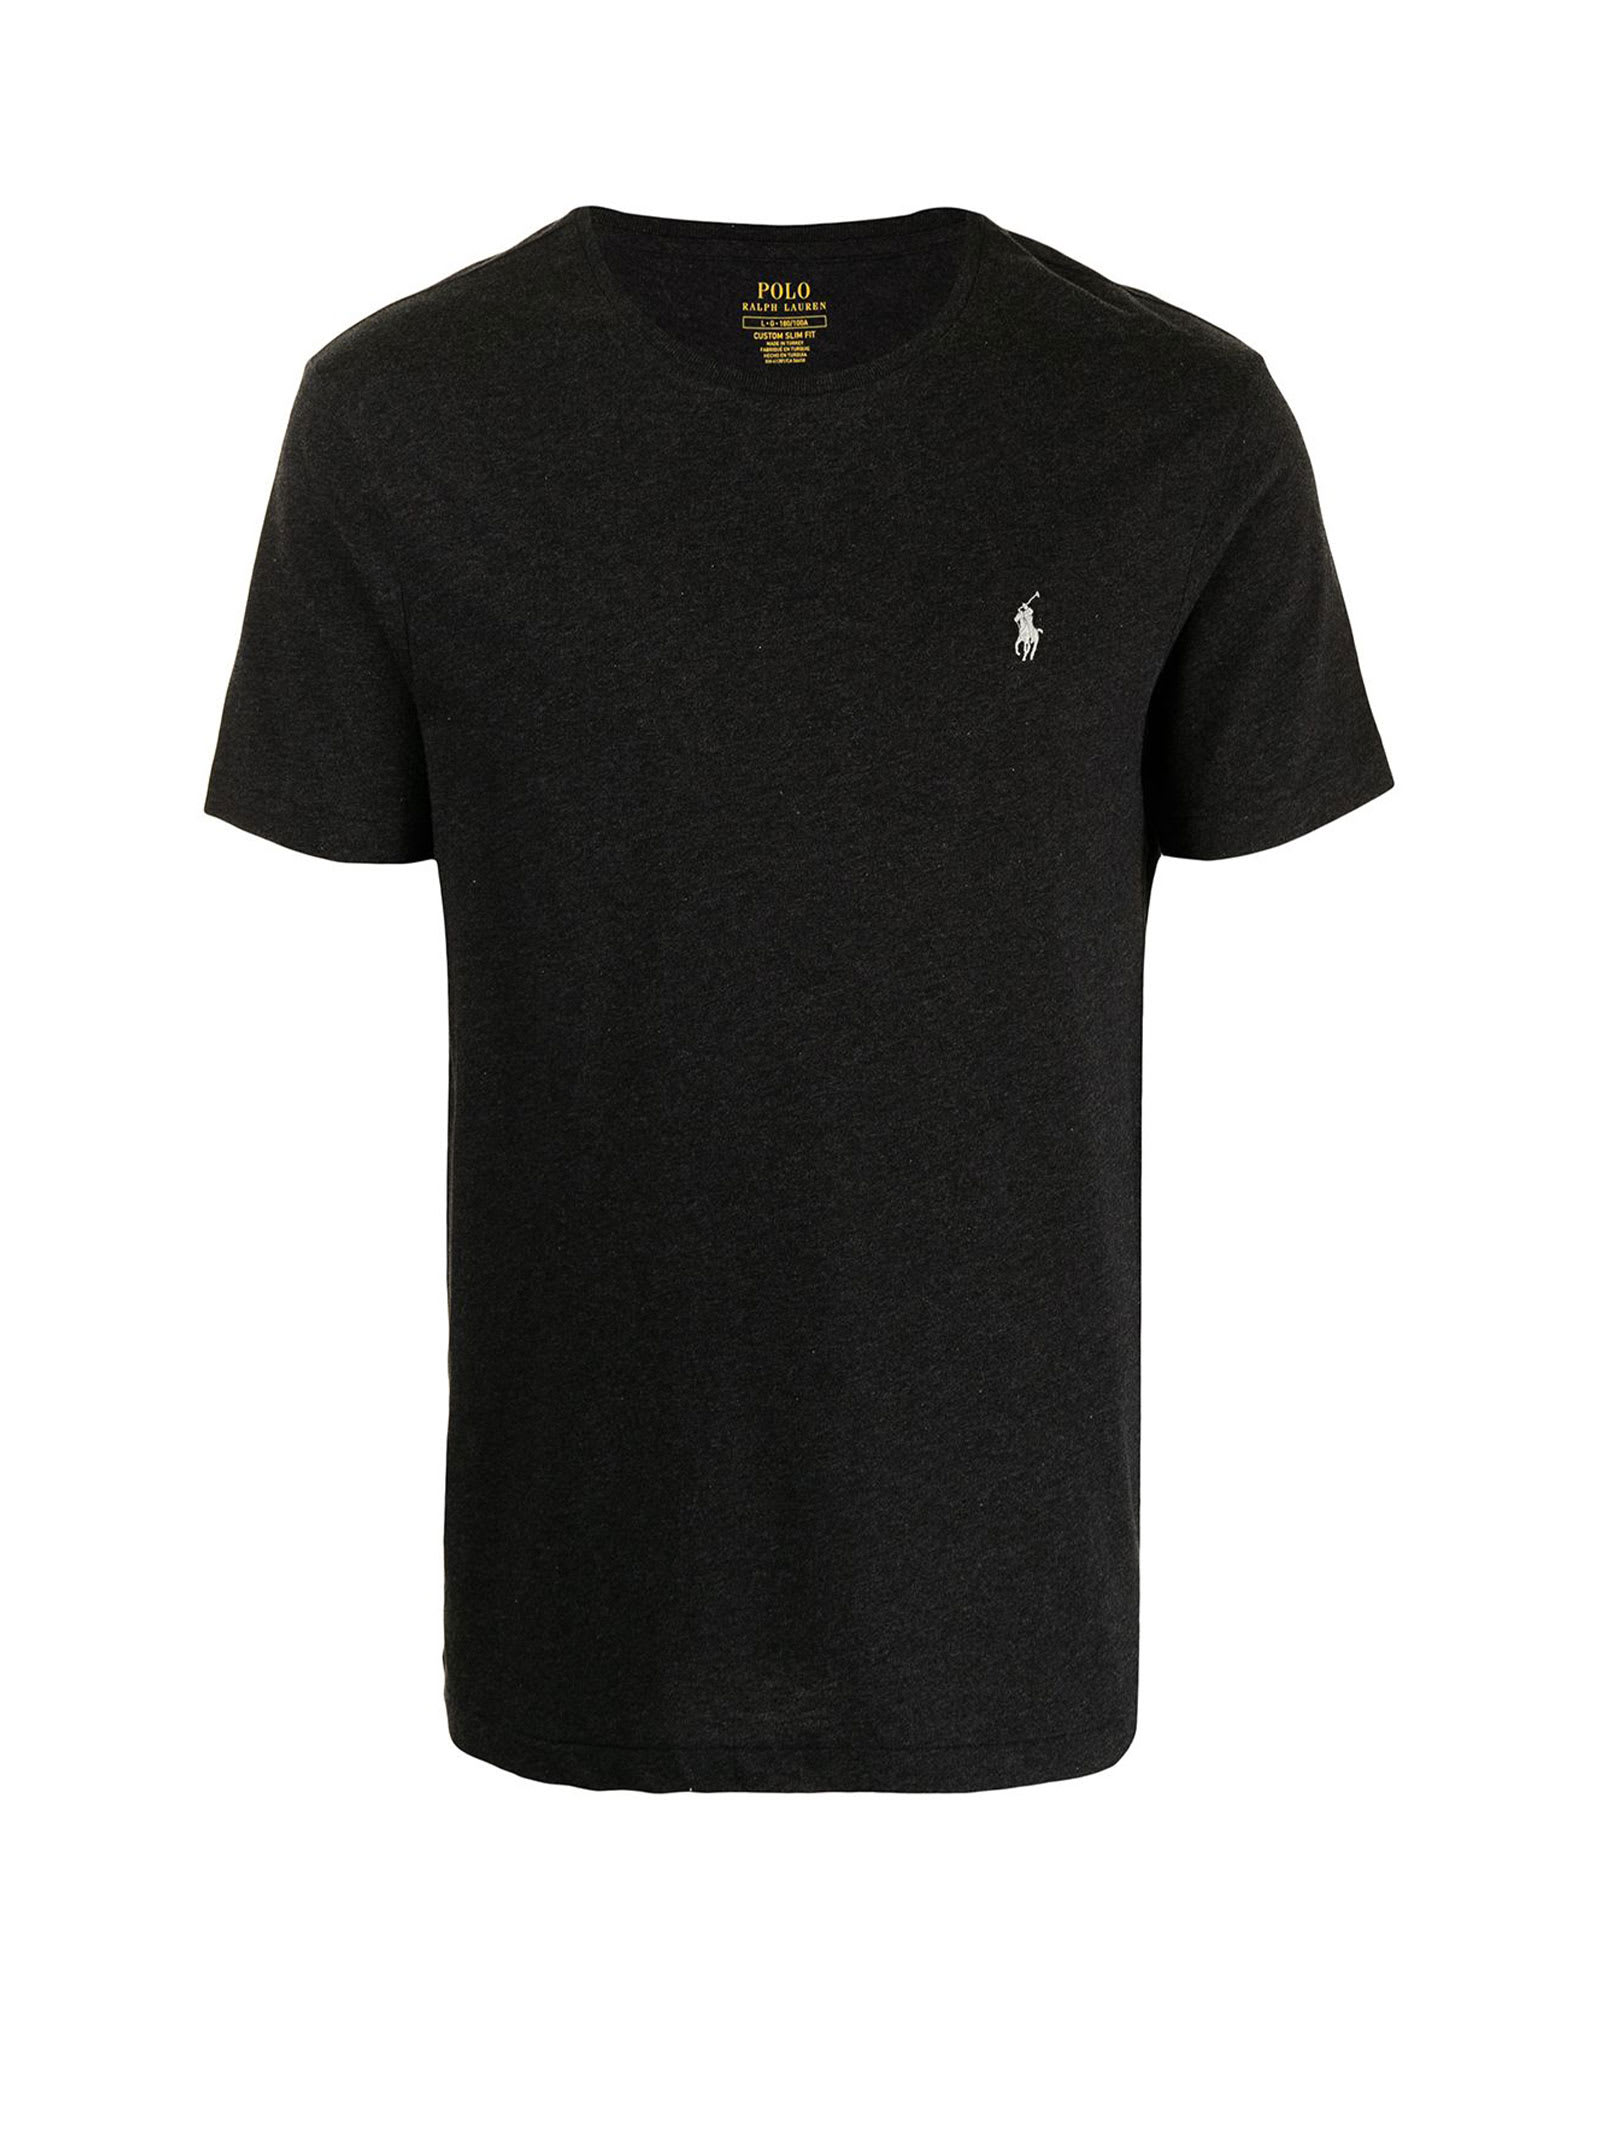 Polo Ralph Lauren T-shirt With Contrasting Logo